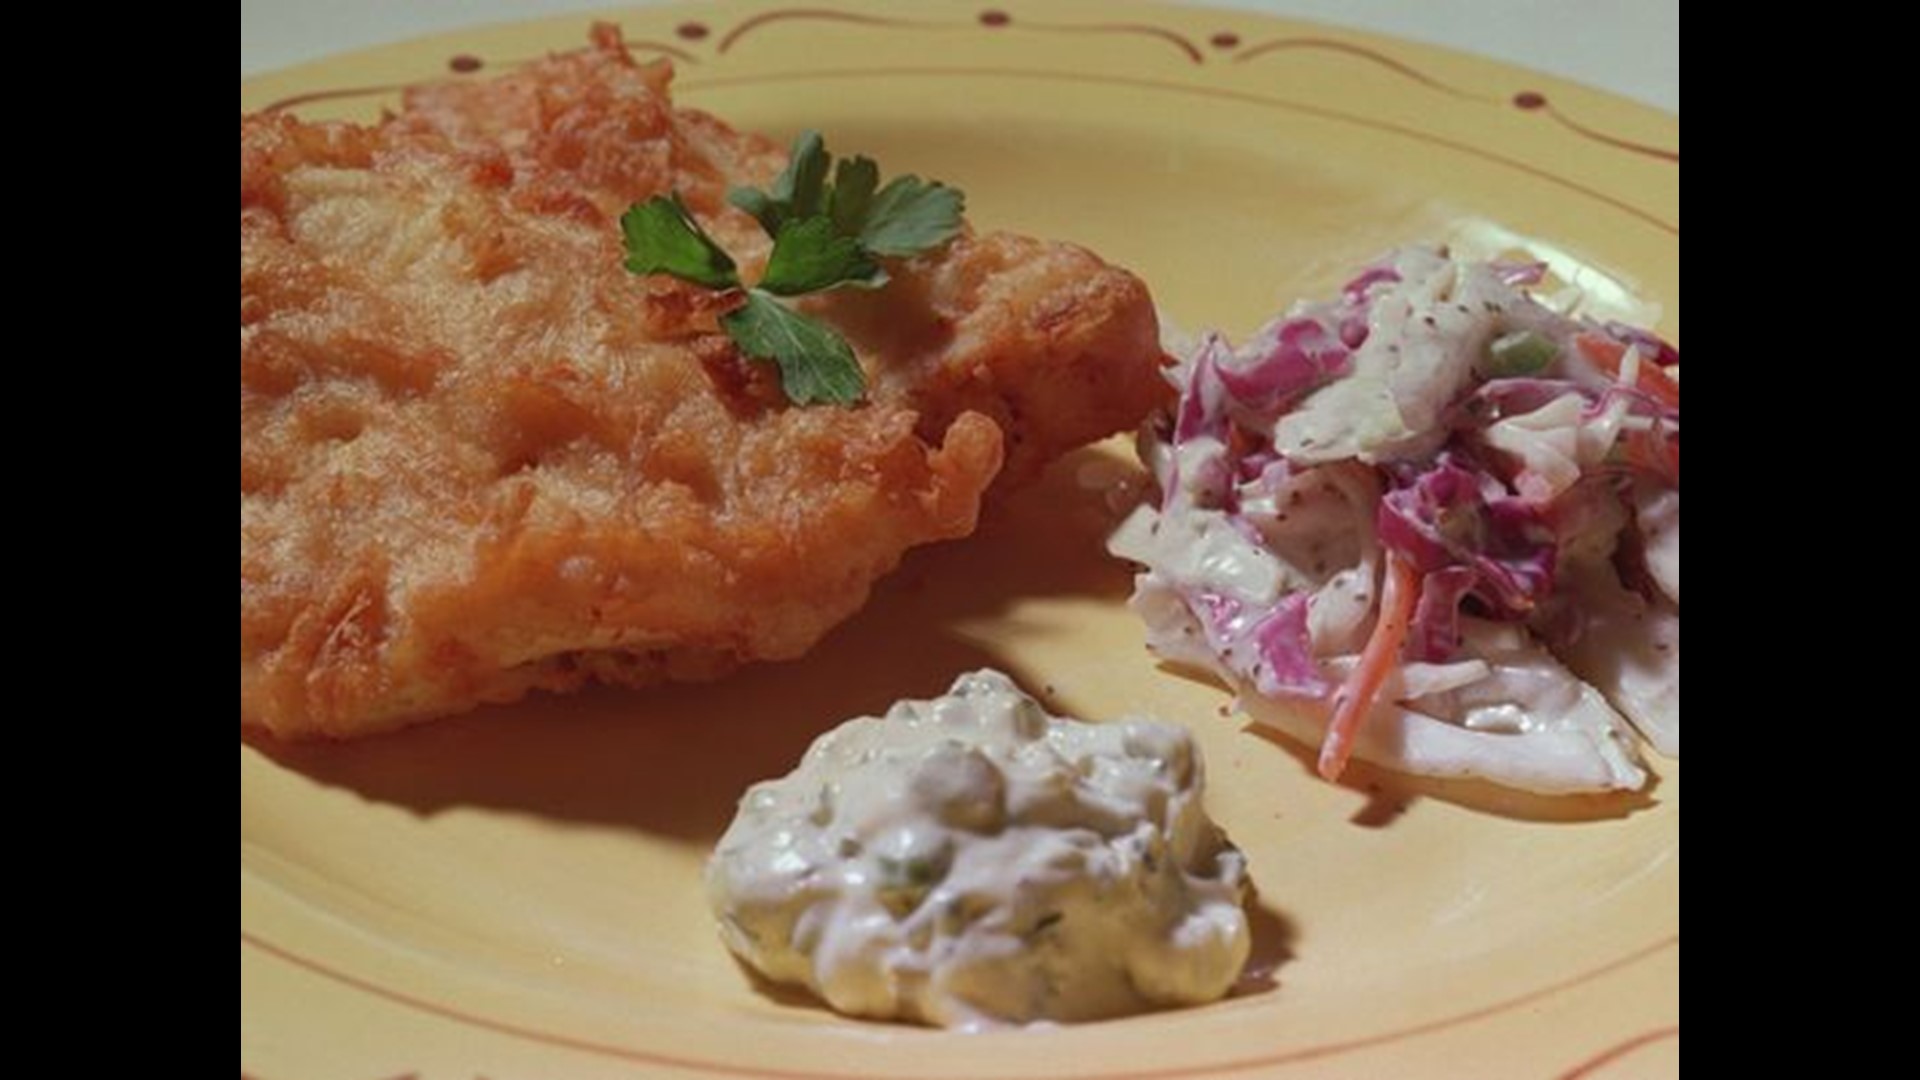 The Fish Fry Frenzy continues to the Edible Eight. Be sure to vote for your favorite!